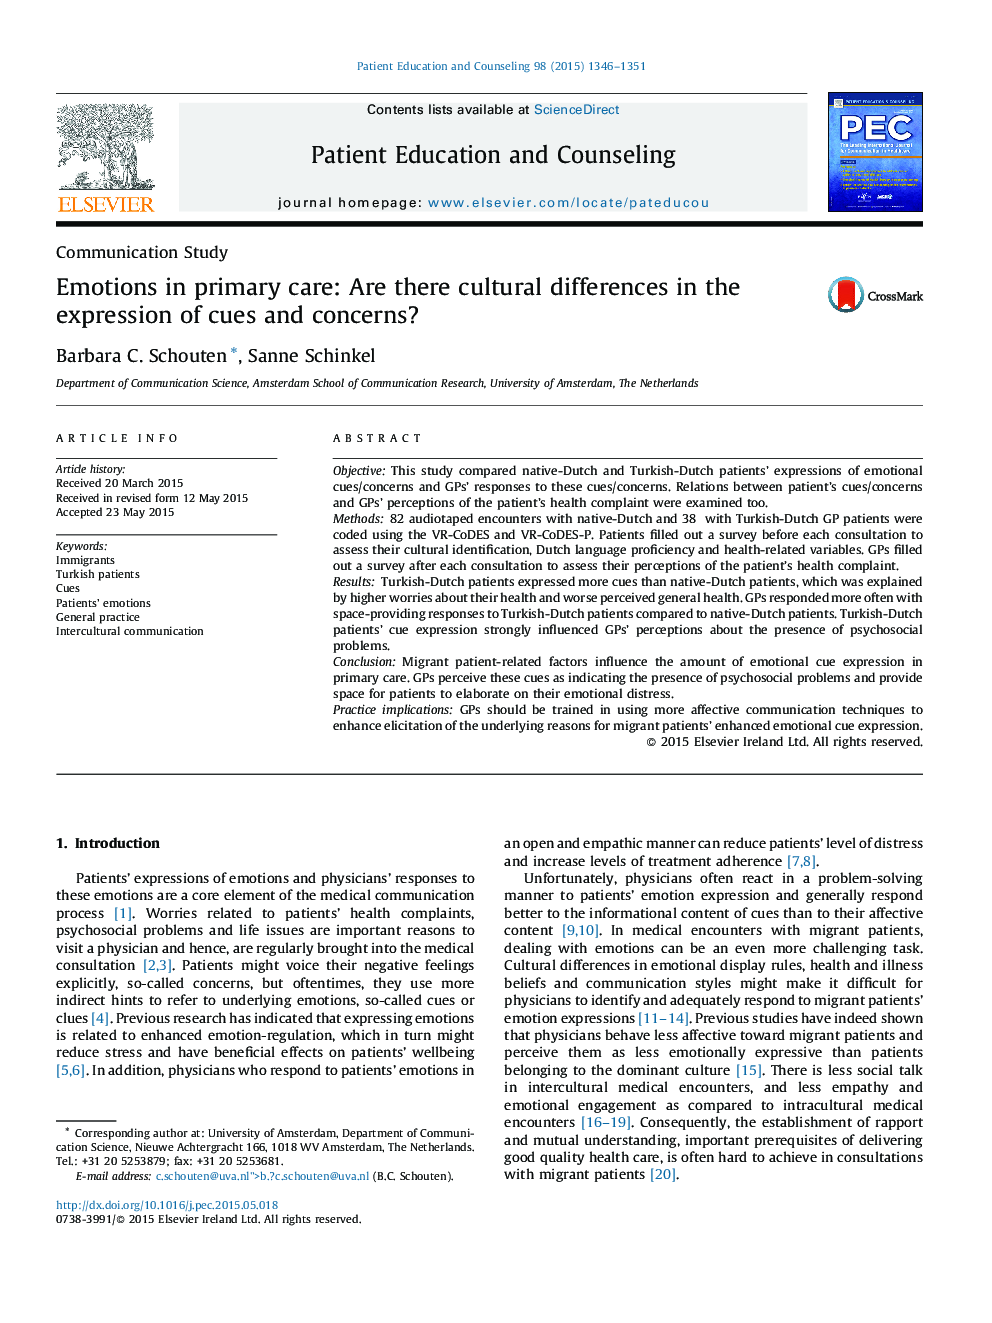 Emotions in primary care: Are there cultural differences in the expression of cues and concerns?